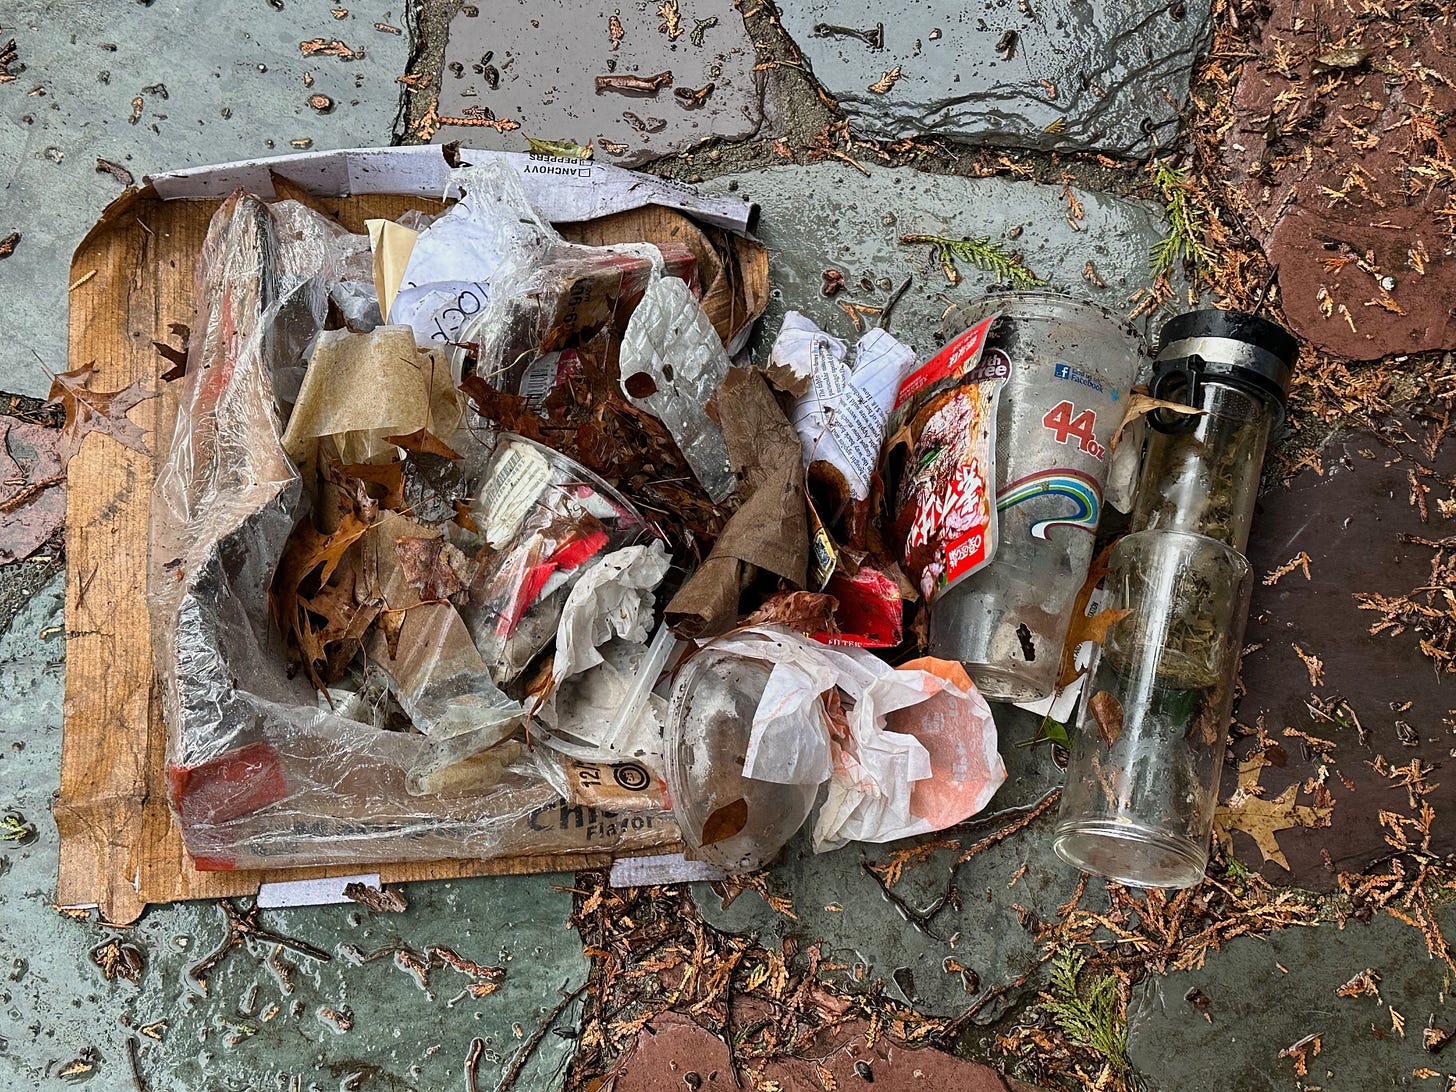 soggy pizza box and other wet garbage left on the street after heavy rain 